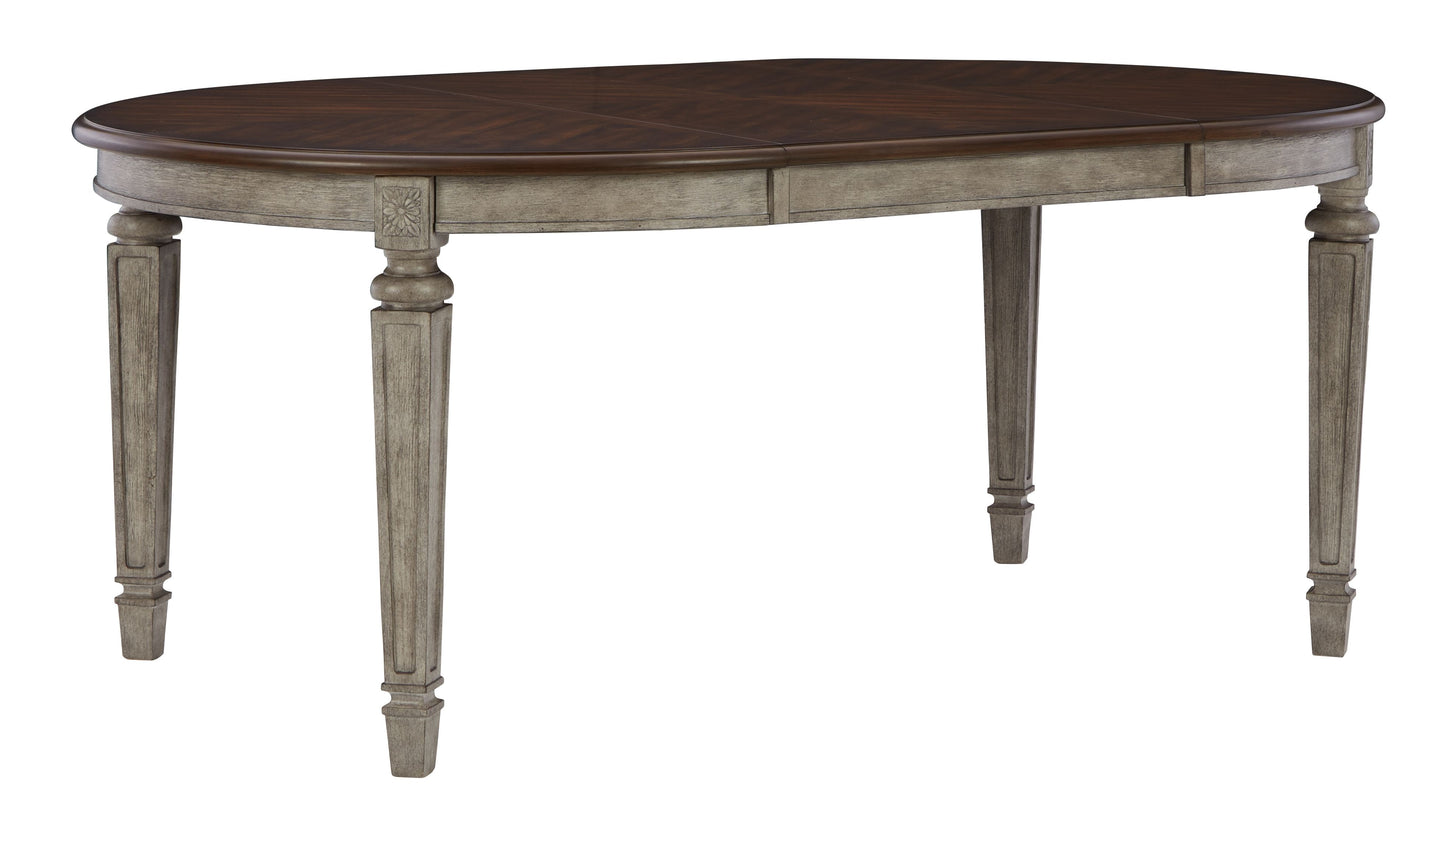 Lodenbay - Antique Gray - Oval Dining Room Ext Table